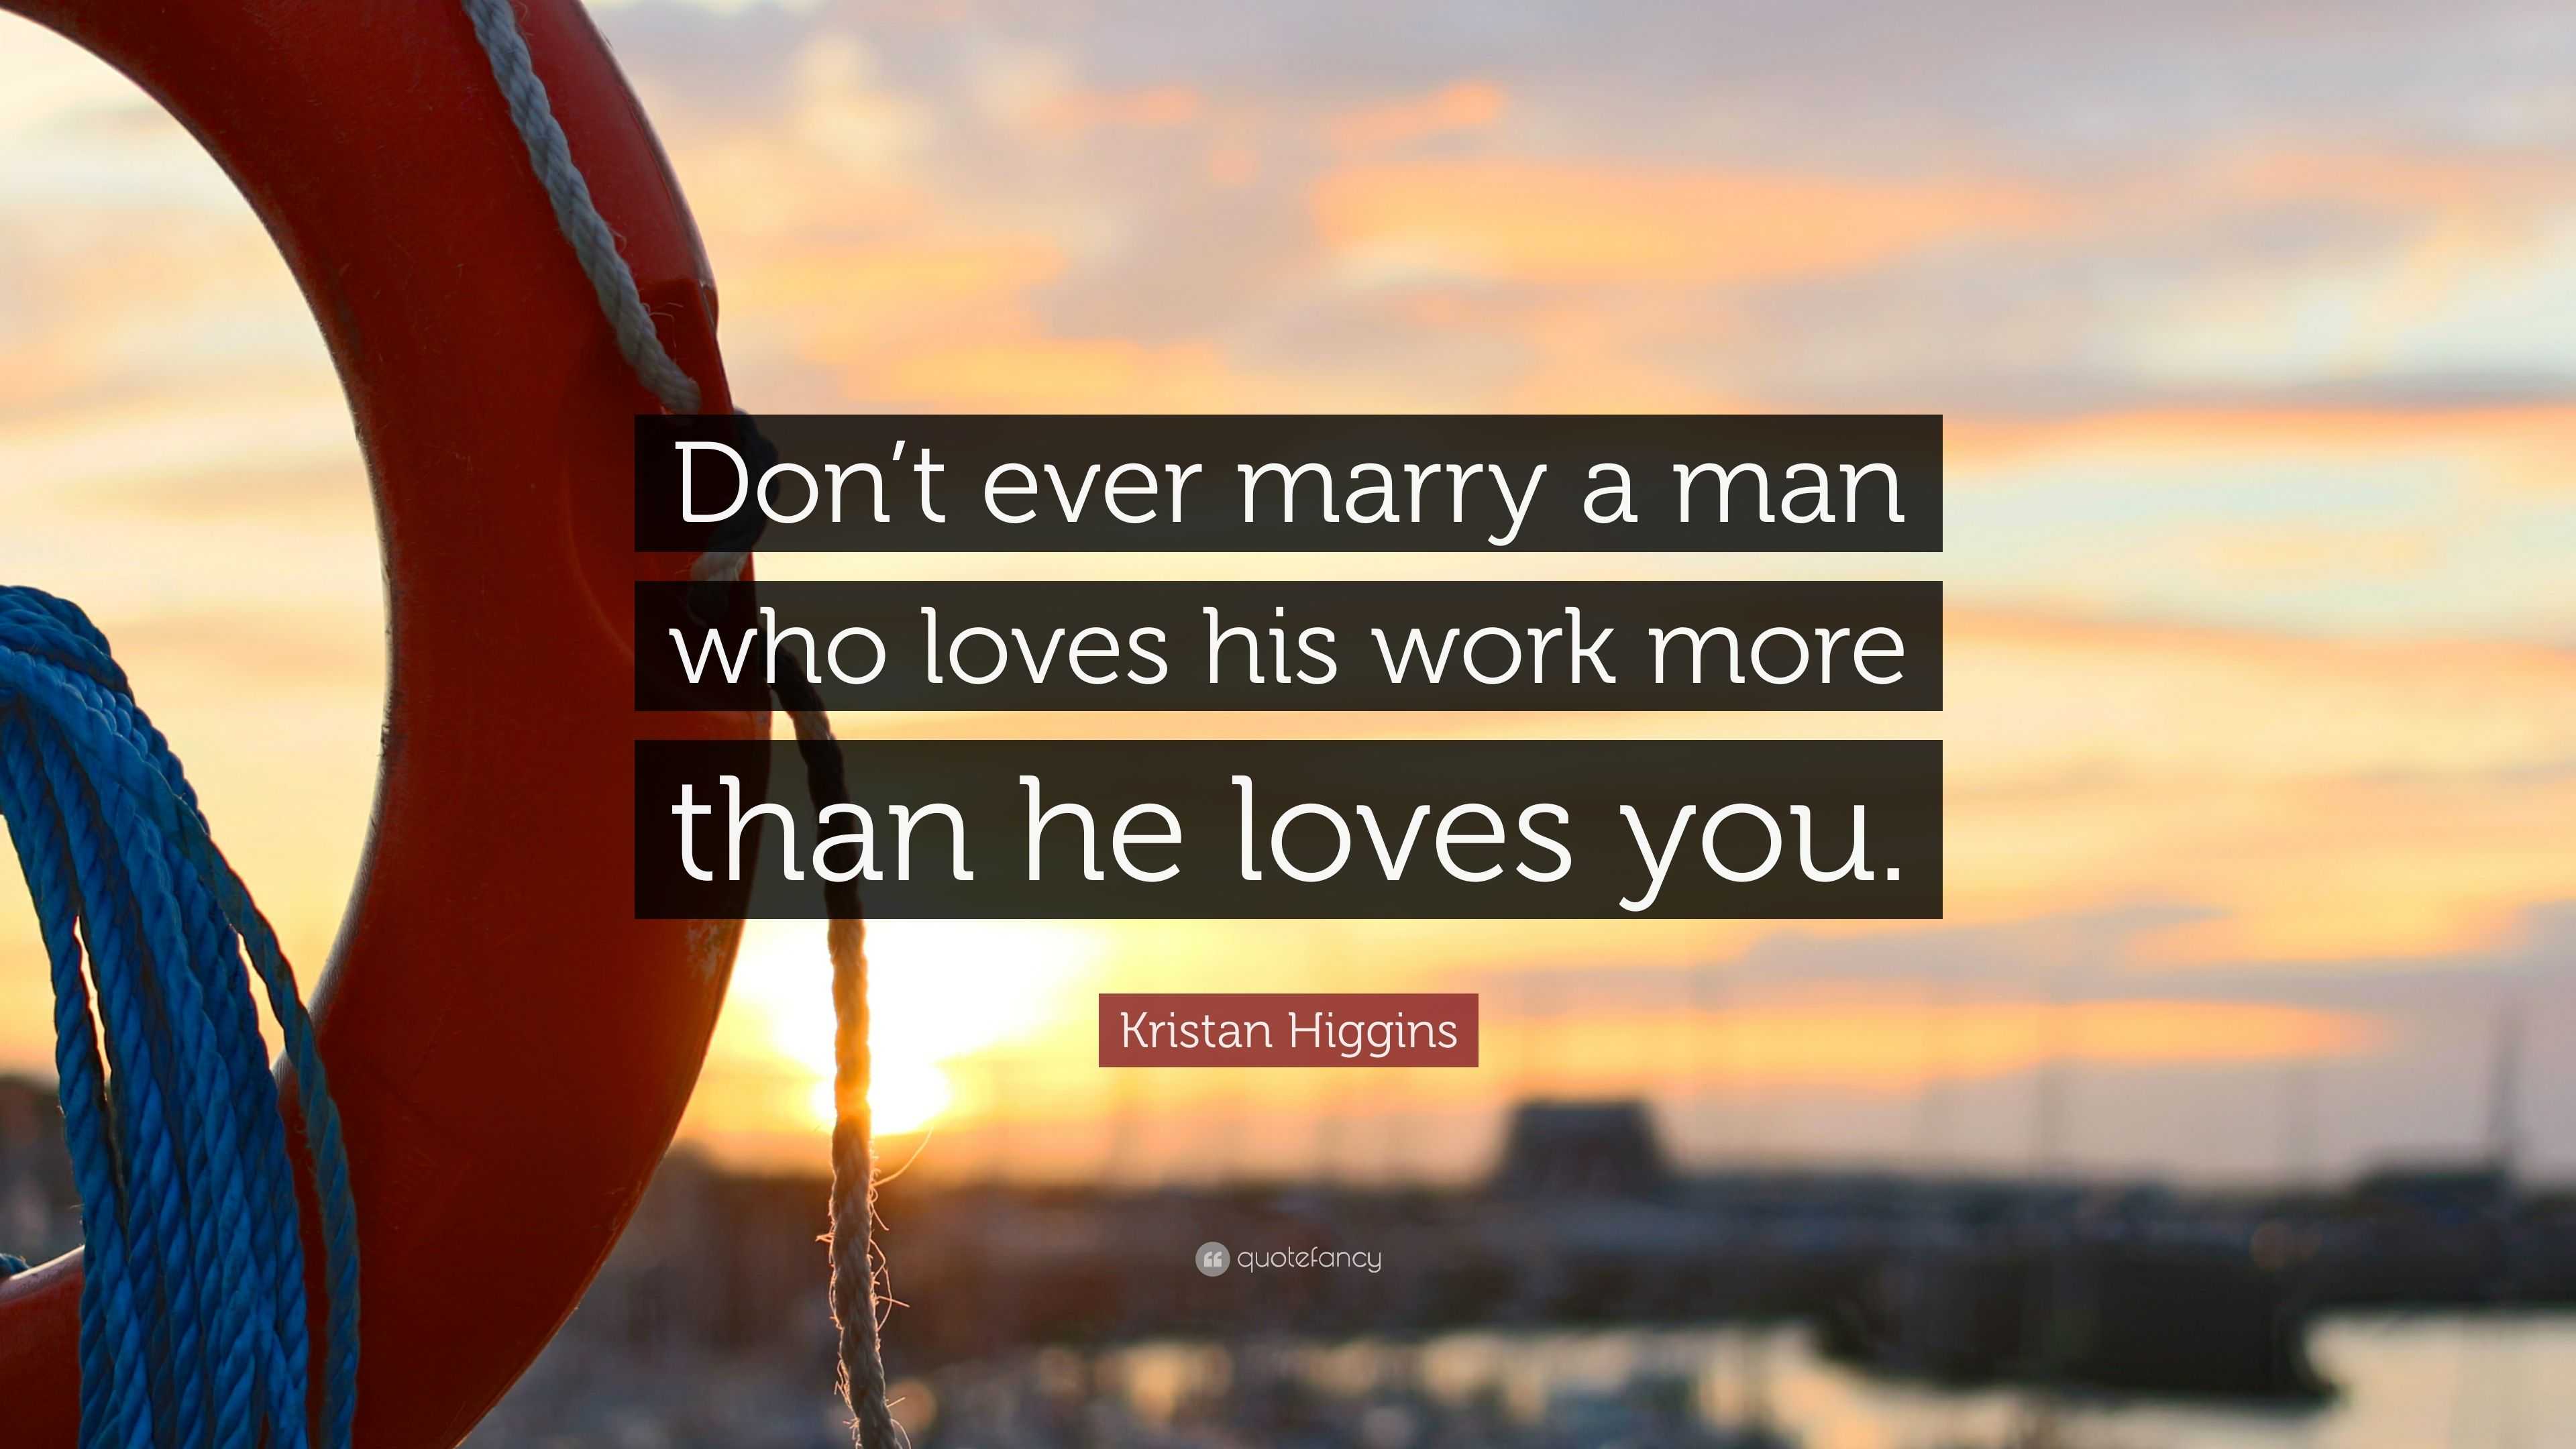 Kristan Higgins Quote “Don t ever marry a man who loves his work